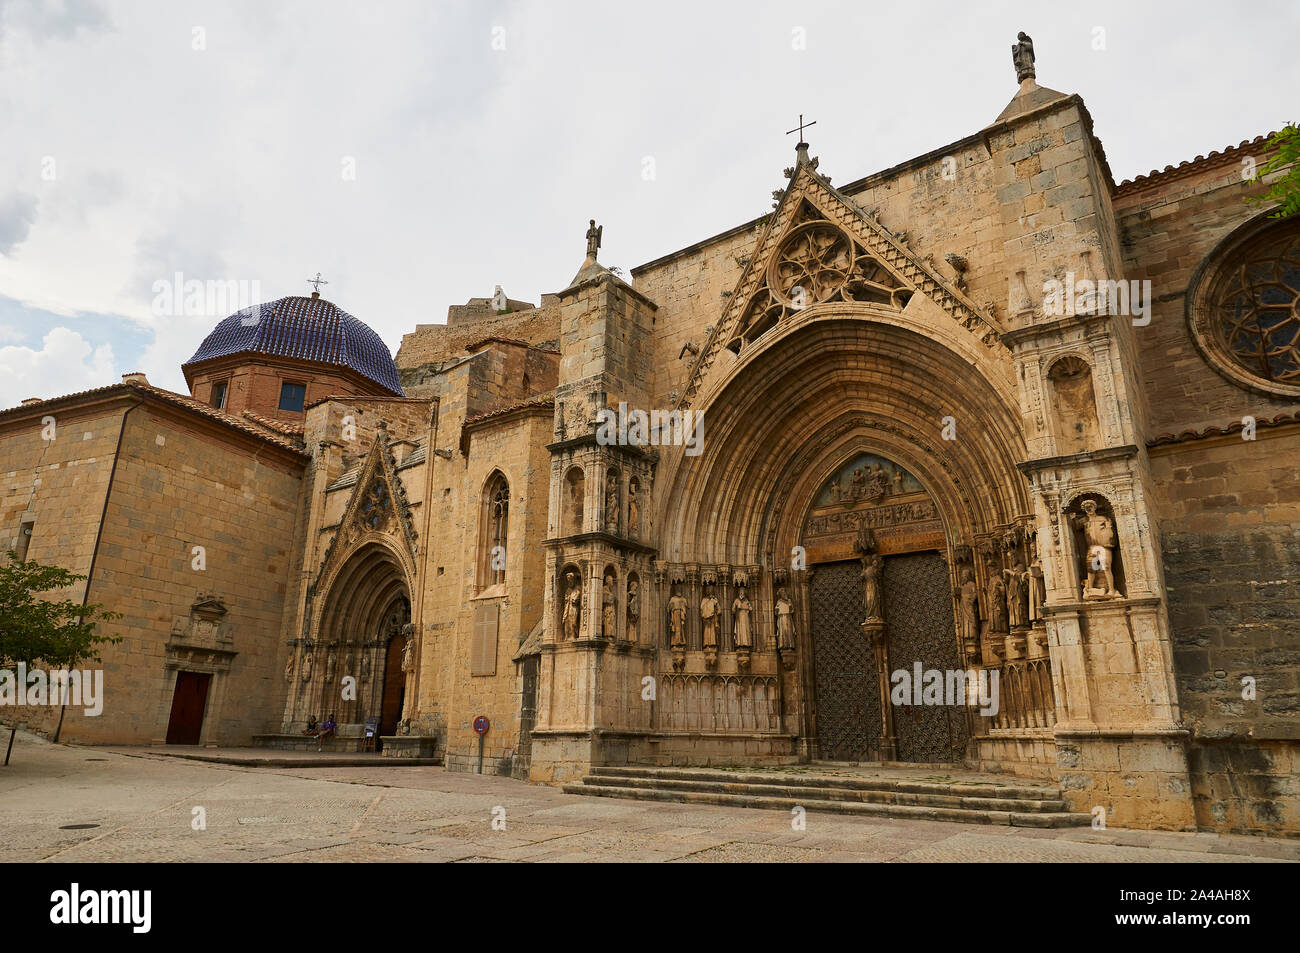 Santa Maria la Mayor, XIII century gothic and renaissance church in Morella, one of the Most beautiful towns in Spain (Maestrazgo, Castellón, Spain) Stock Photo